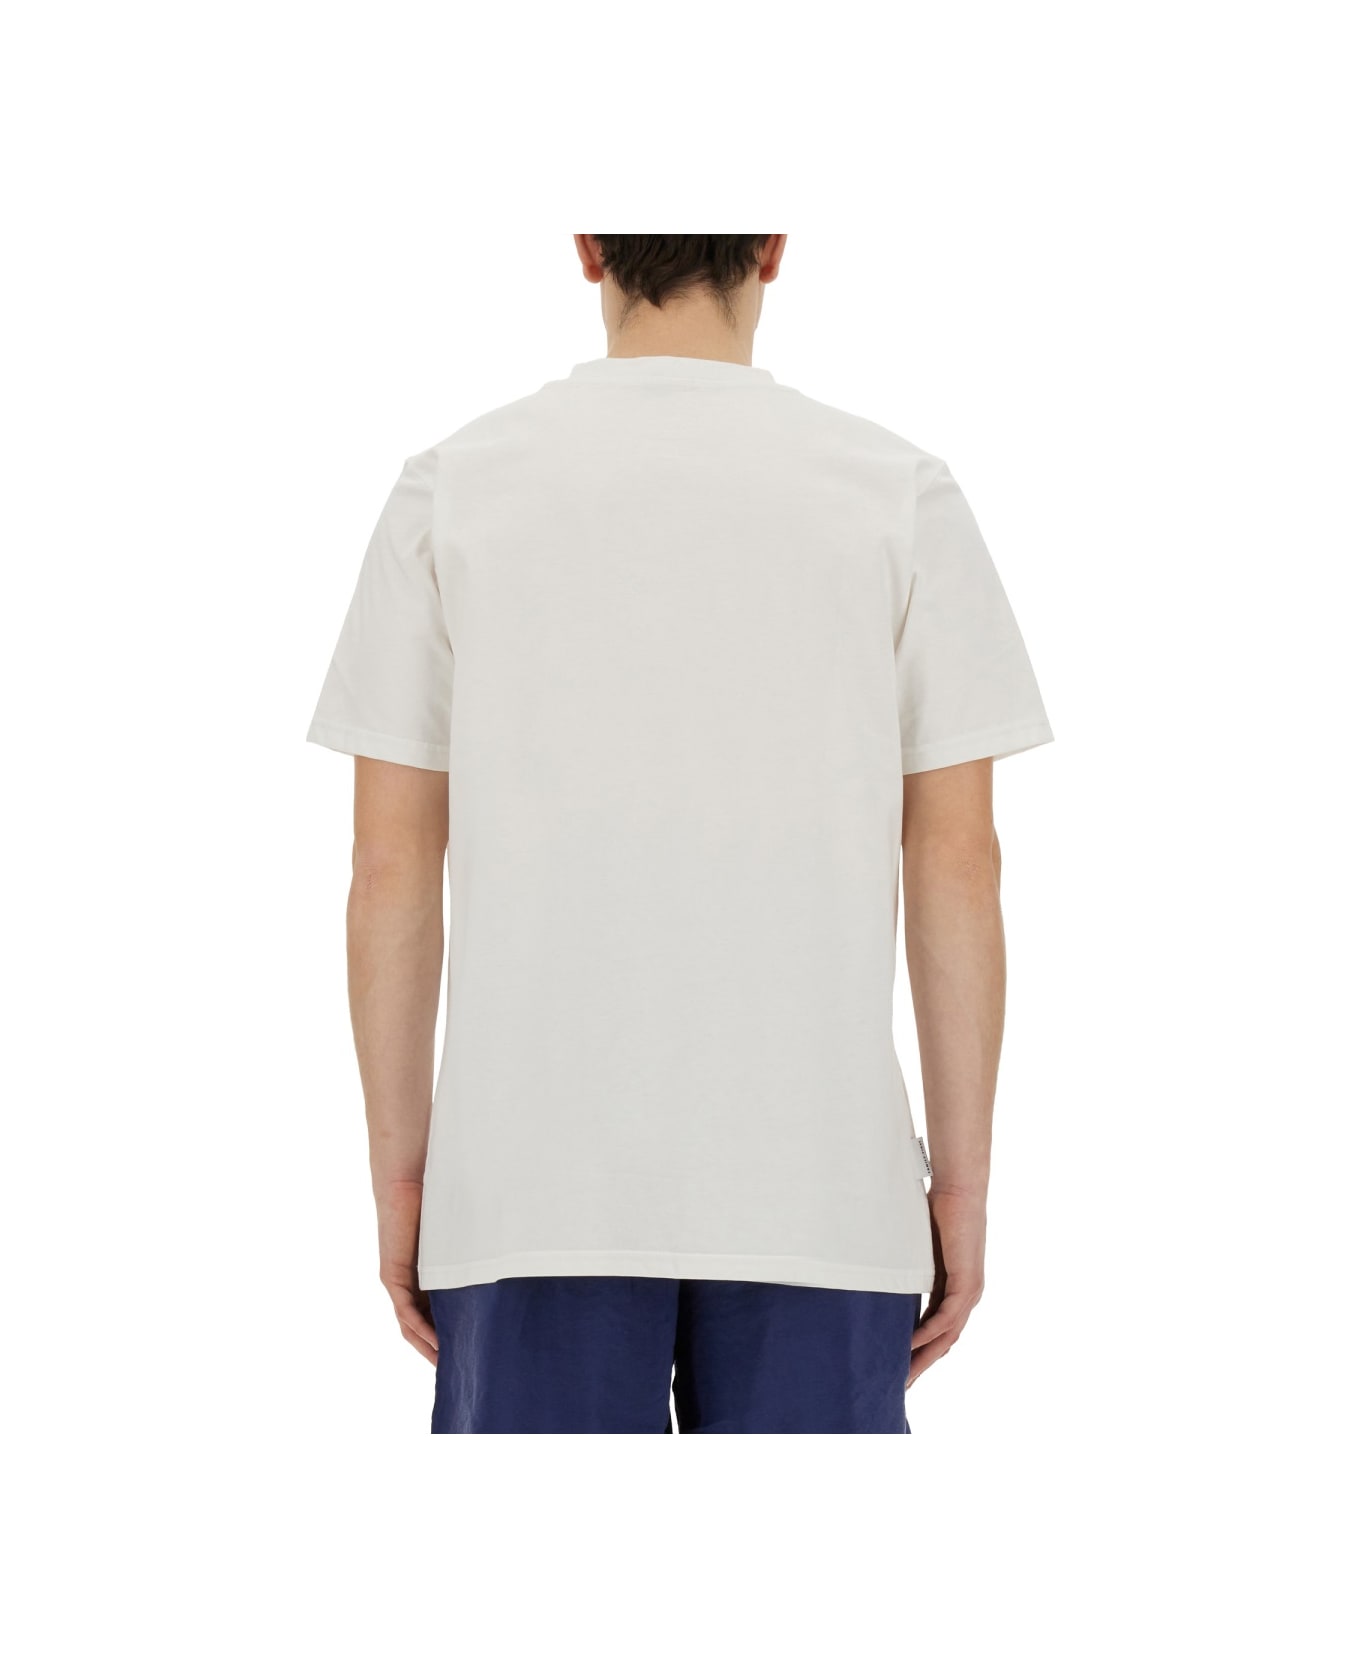 Family First Milano T-shirt With "caviar" Print - WHITE